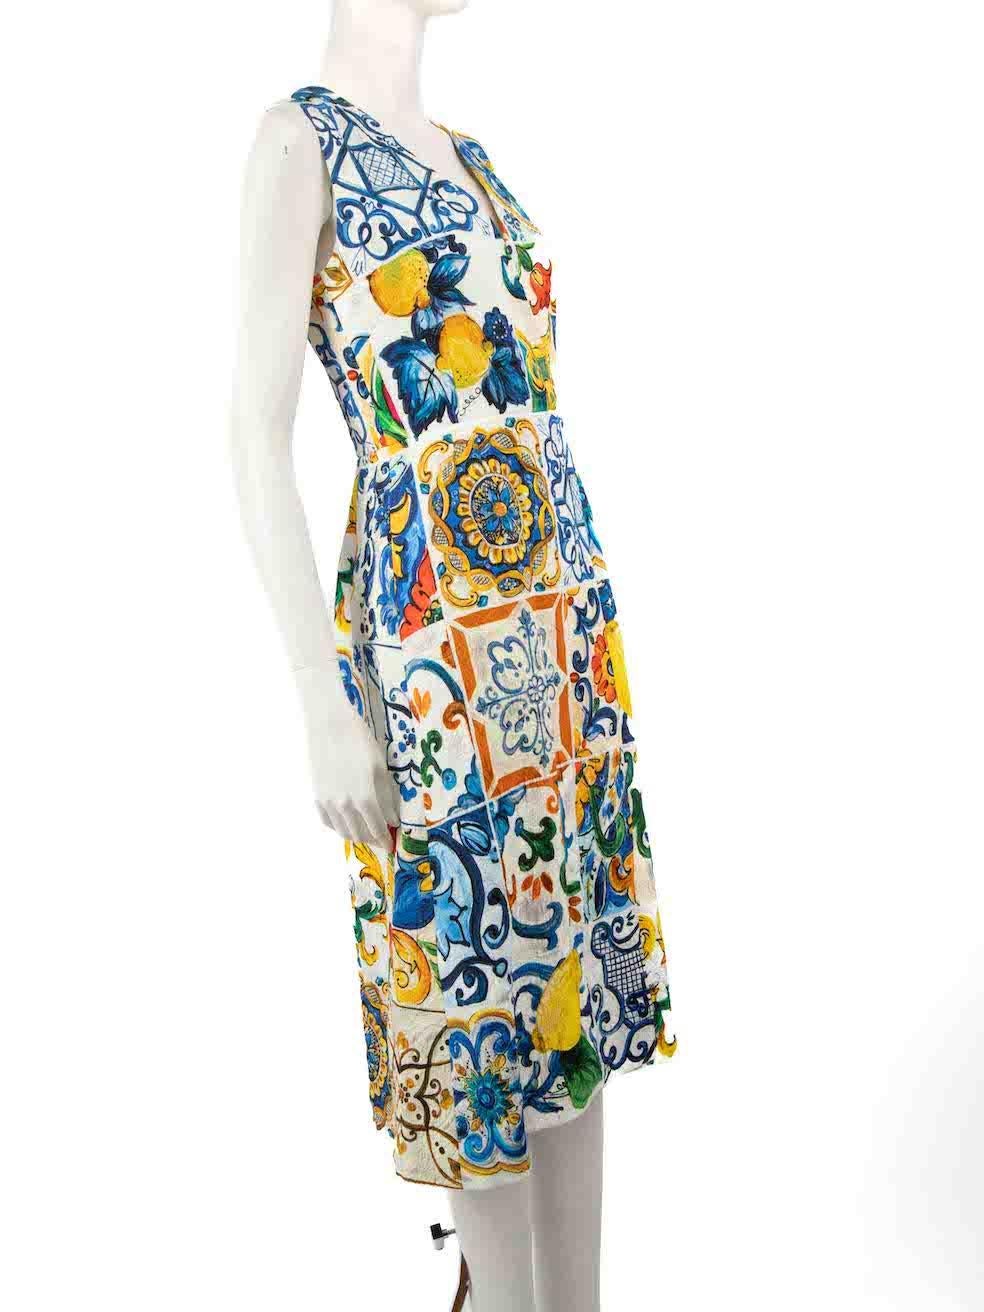 CONDITION is Never worn, with tags. No visible wear to dress is evident on this new Dolce & Gabbana designer resale item.
 
 
 
 Details
 
 
 Multicolour
 
 Cotton
 
 Midi dress
 
 Tile print pattern
 
 V neckline
 
 Sleeveless
 
 Back zip closure